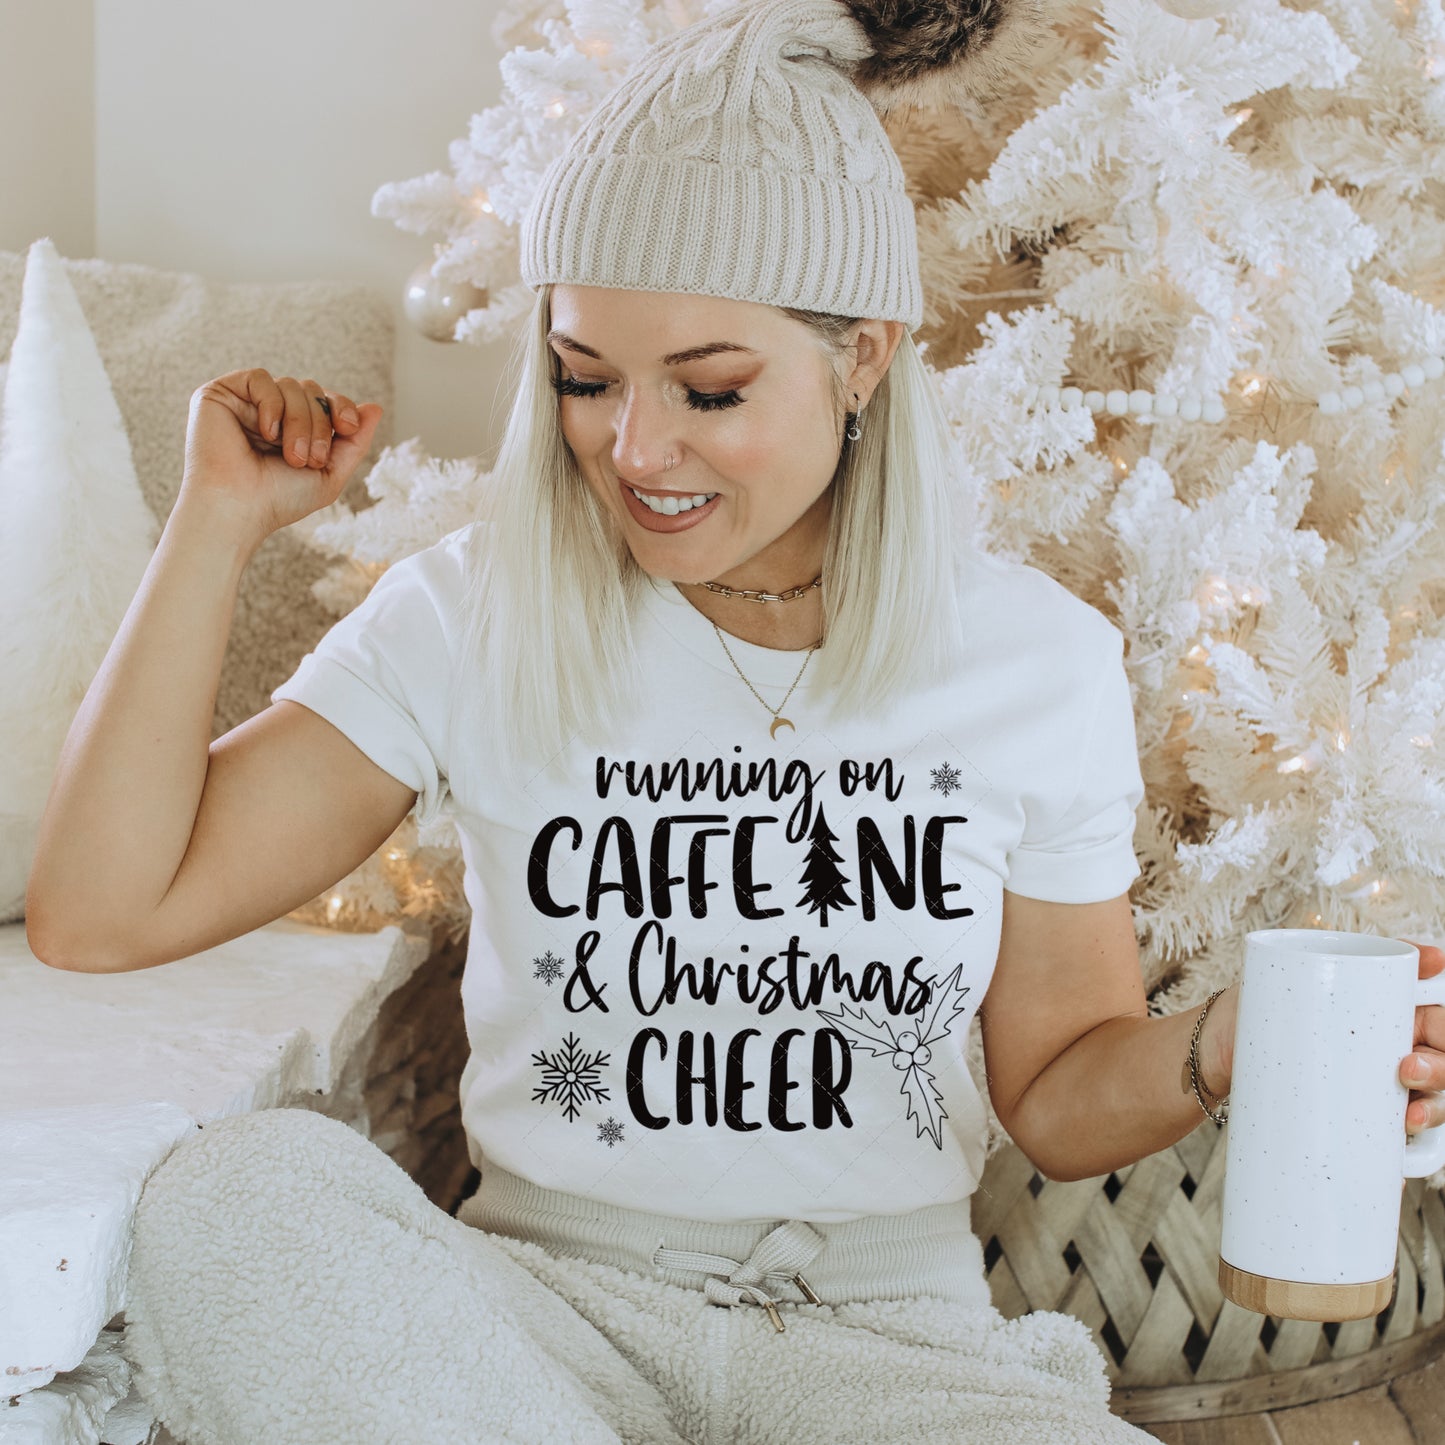 Running on Caffeine and Christmas Cheer/Shit (2 PNG Files)